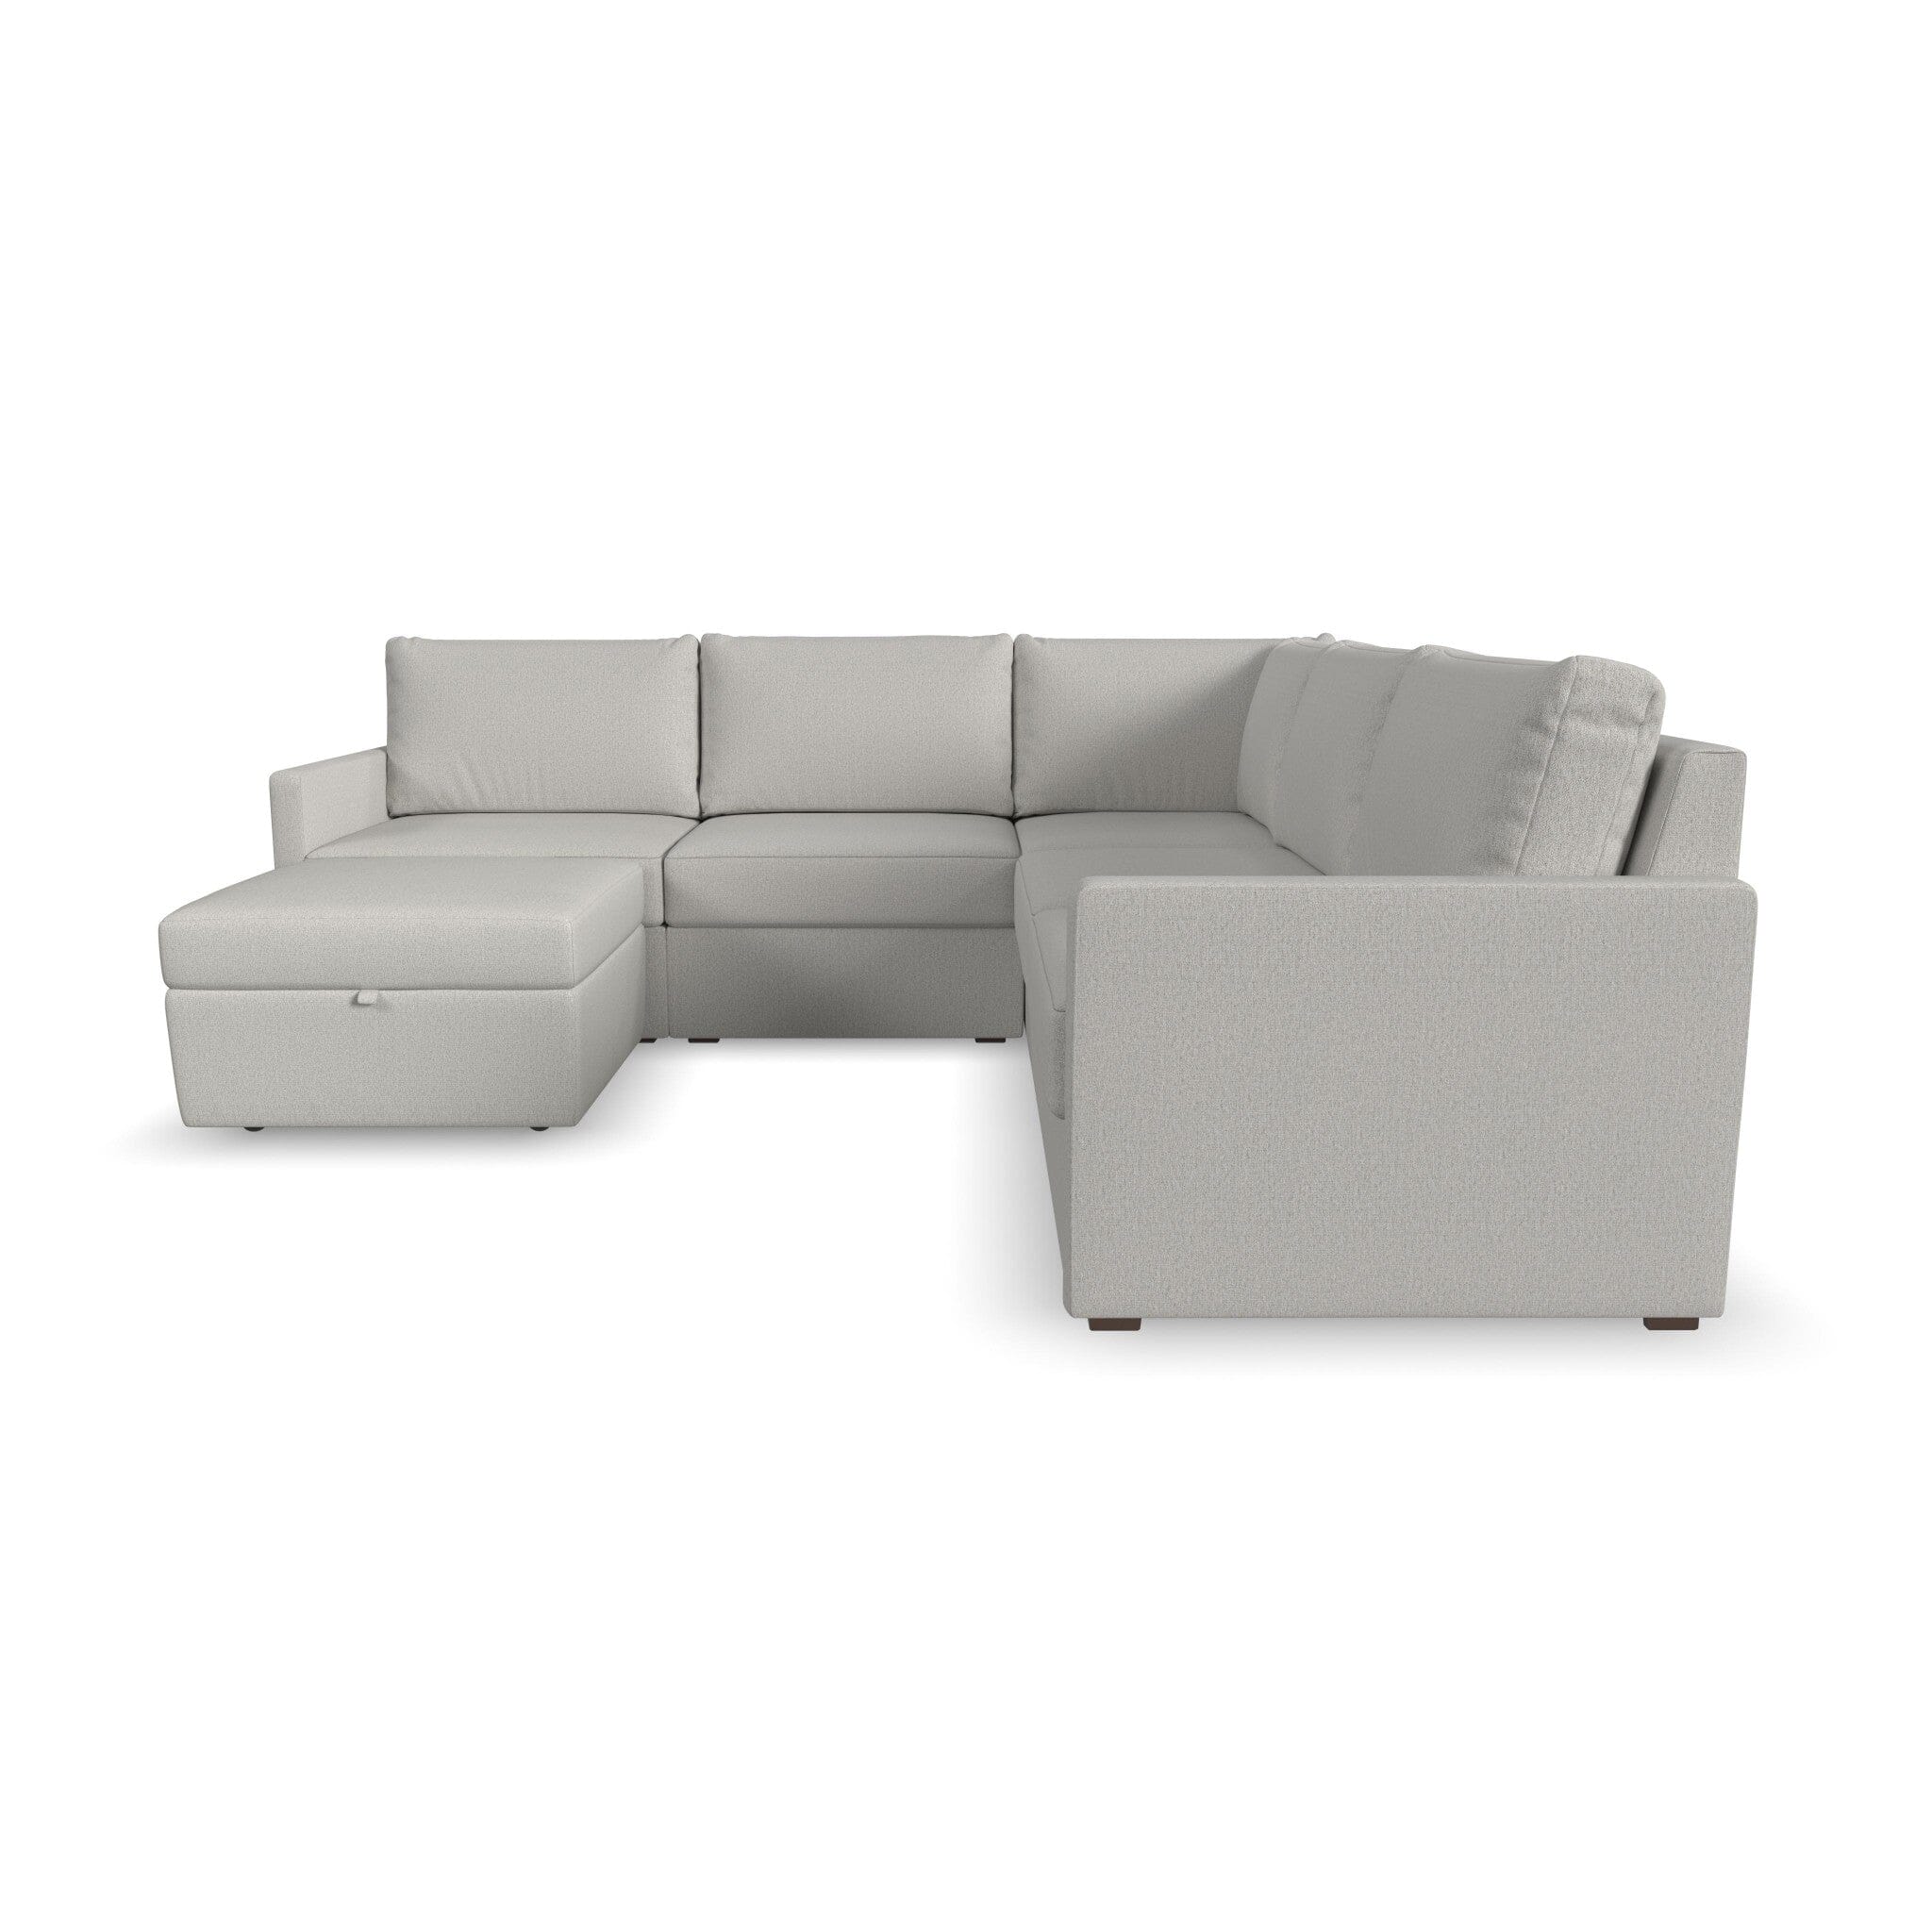 Traditional 5-Seat Sectional with Narrow Arm and Storage Ottoman By Flex Sectional Flex